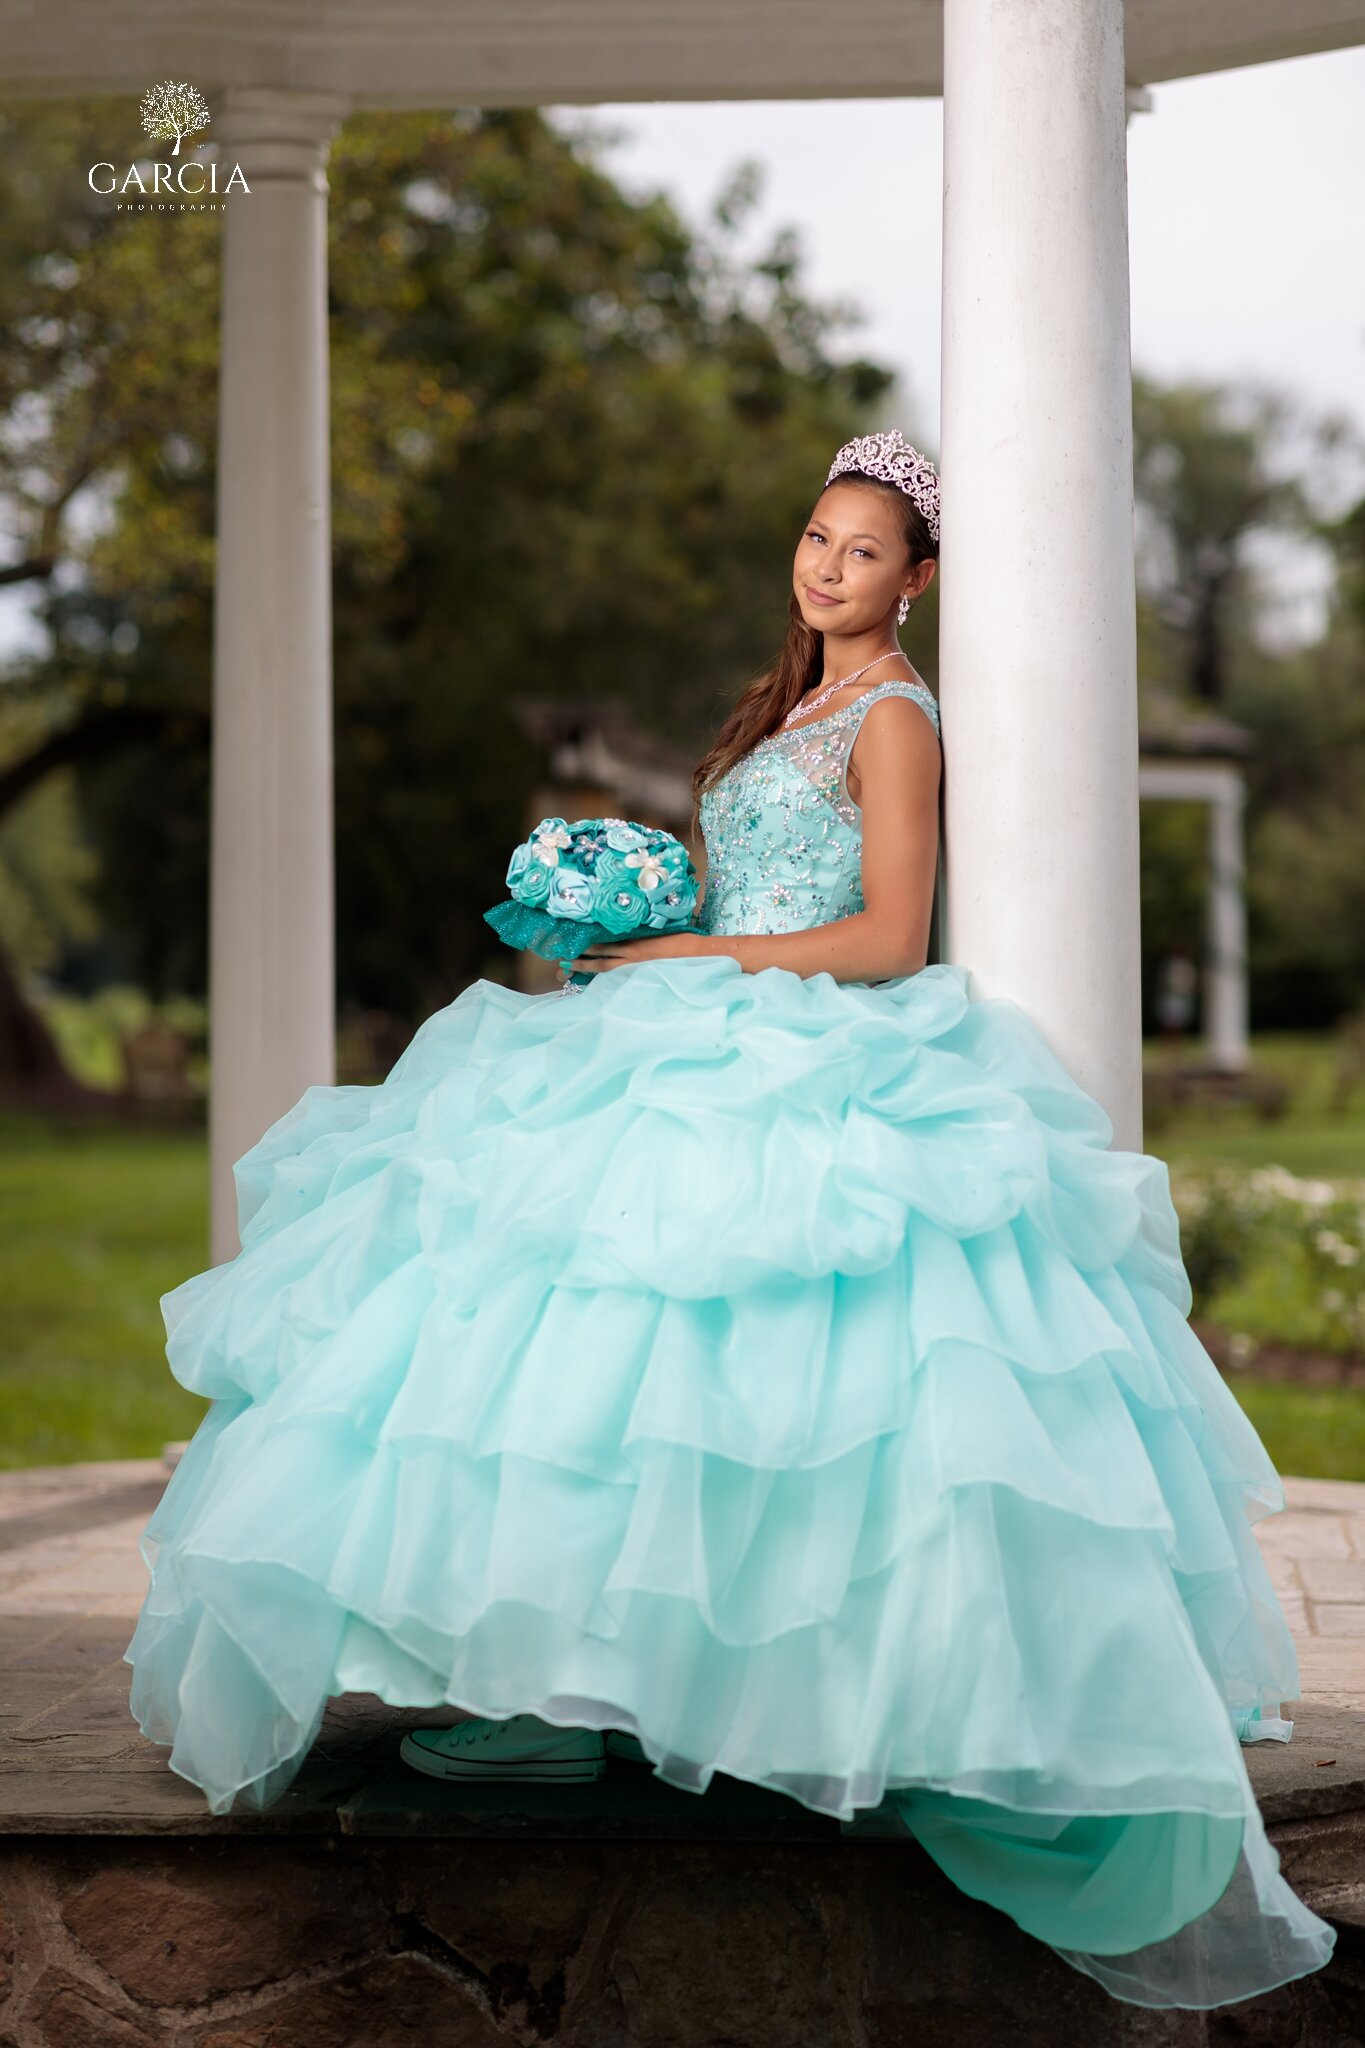 Taylor-Quince-Garcia-Photography-9990.jpg